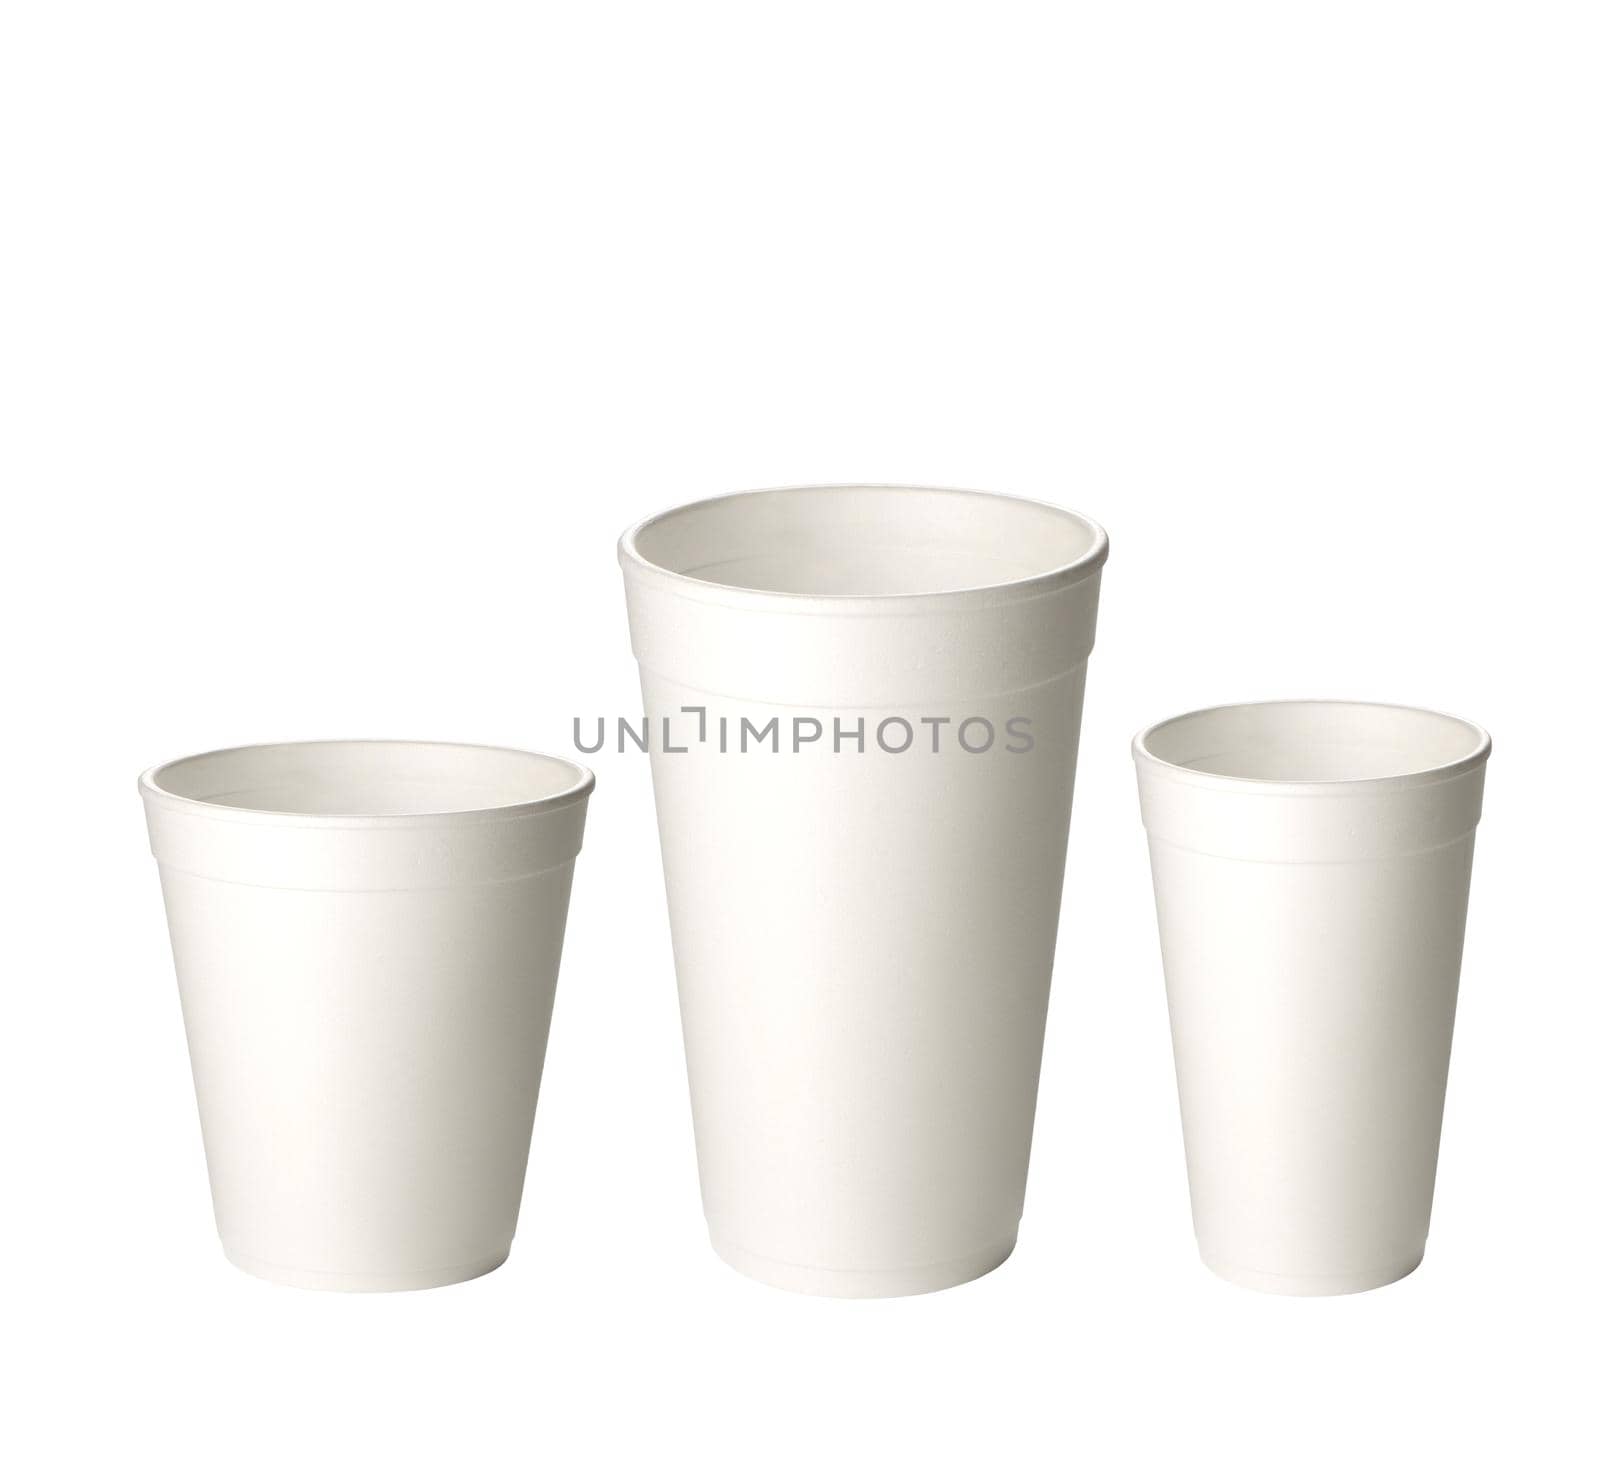 three empty disposable plastic cup isolated on white background